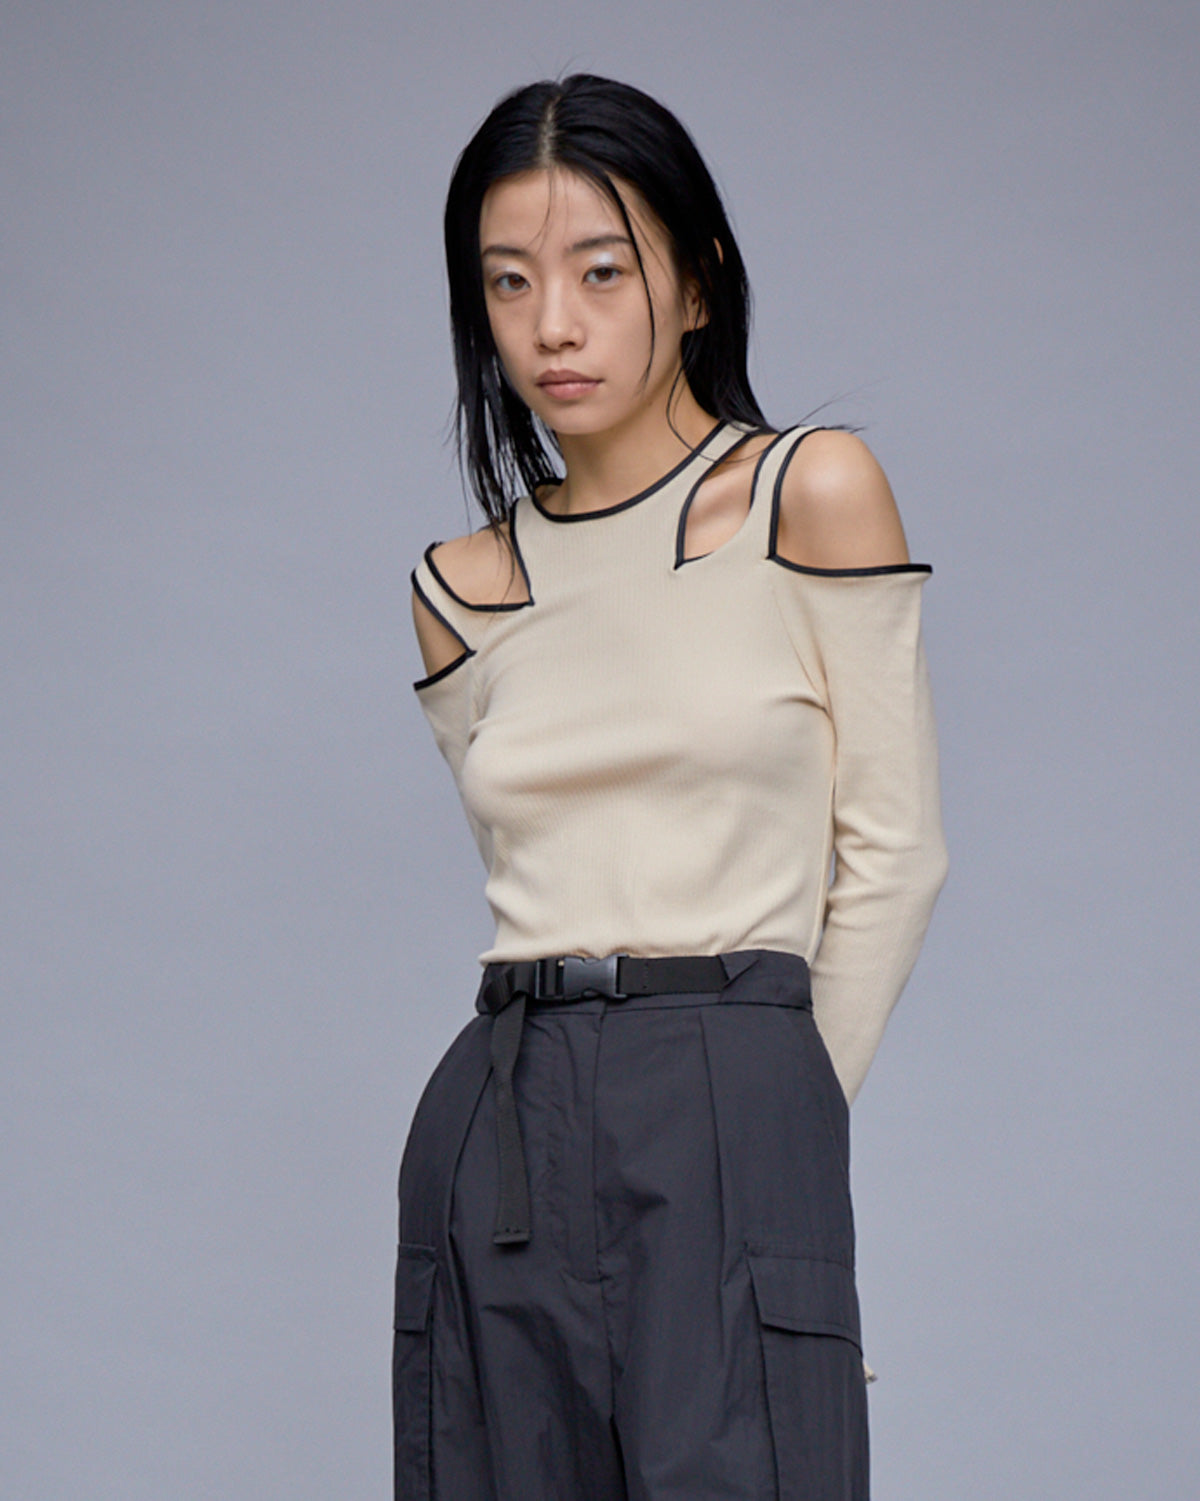 NOTCH DESIGN TERECO RIB TOPS | TOPS | STORE | THINGS THAT MATTER 